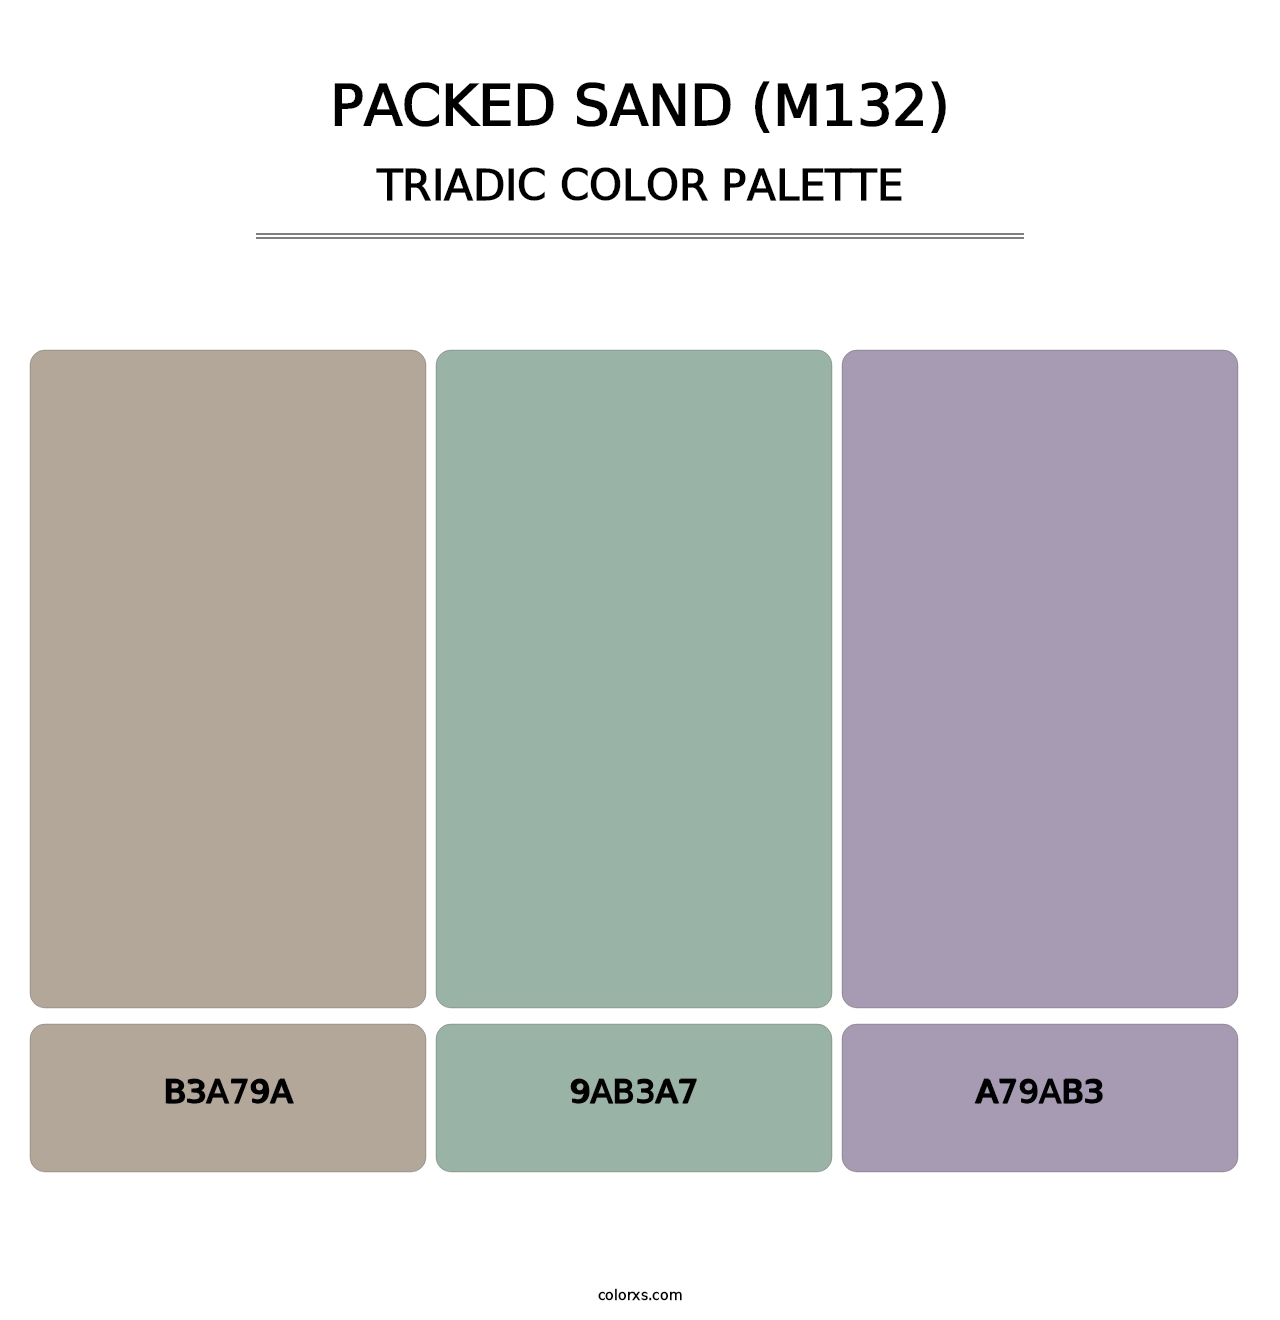 Packed Sand (M132) - Triadic Color Palette